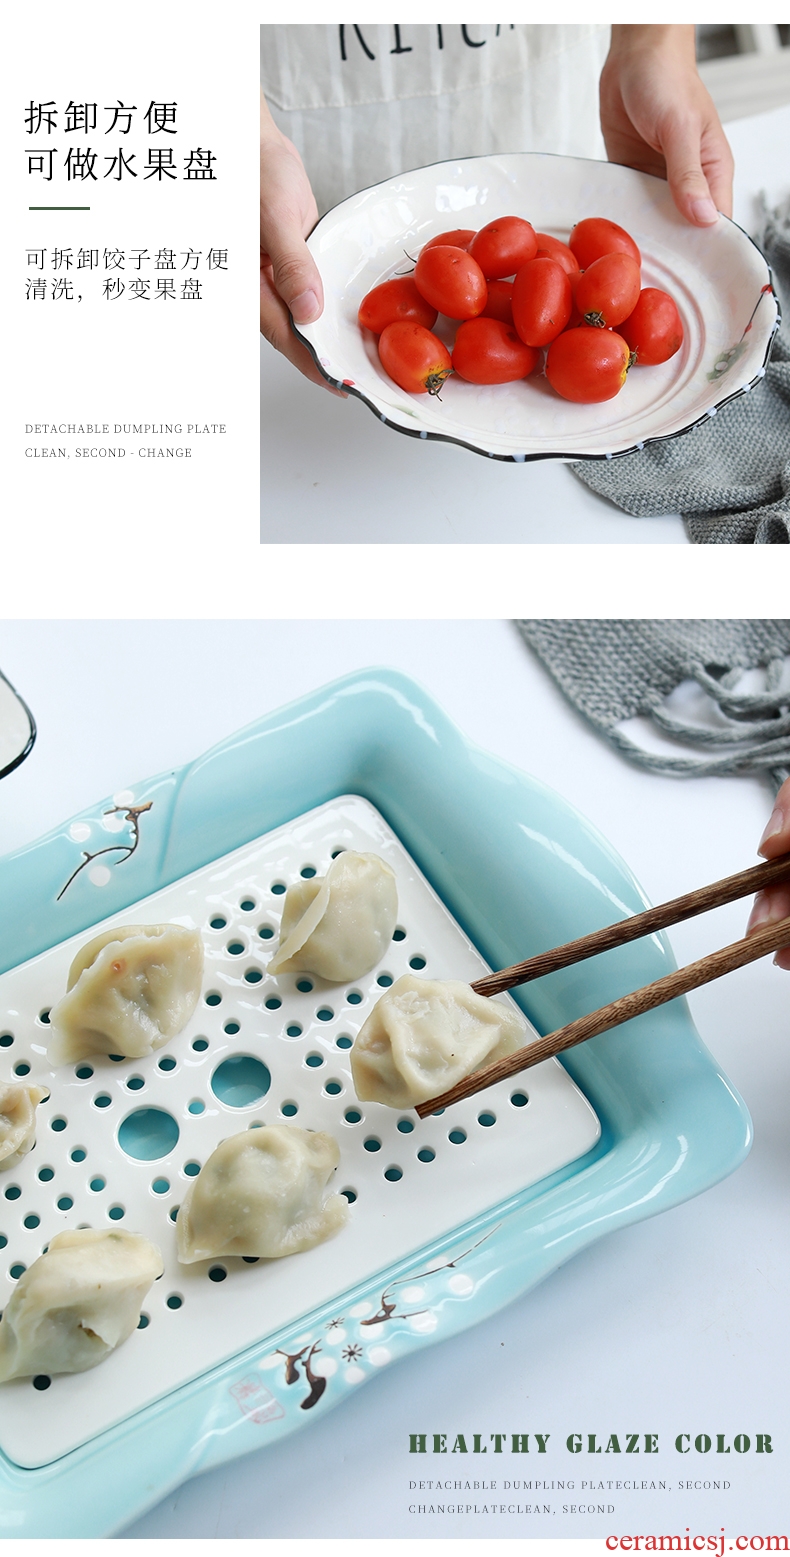 Jingdezhen ceramic plate household rectangular double - deck waterlogging under caused by excessive rainfall steamed dumpling dish of steamed fish dish Nordic dumpling dinner plate